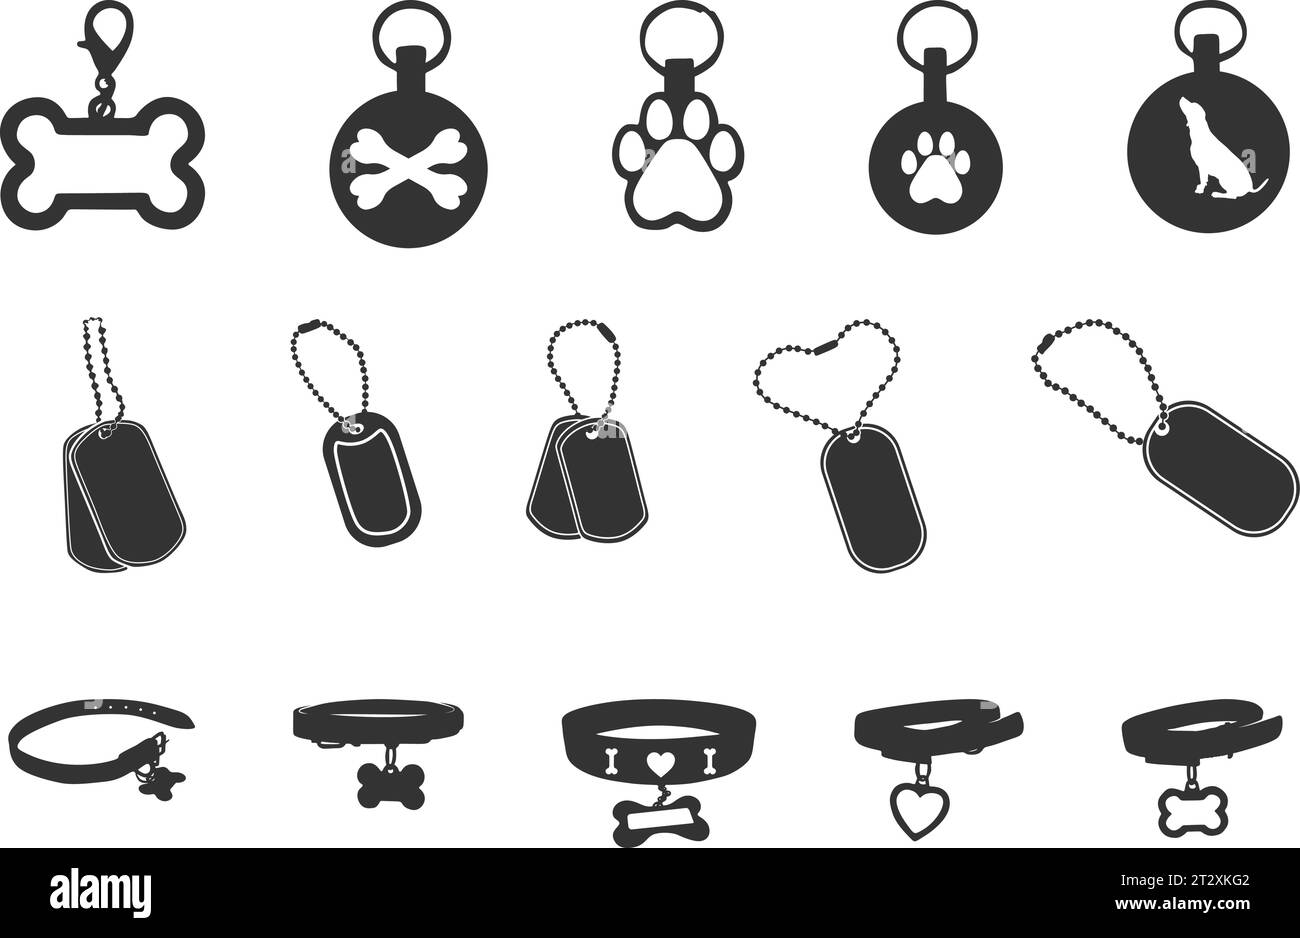 Dog tag silhouette, Dog tag army silhouettes, Dog collar silhouette, Dog ring silhouettes, Dog tag SVG, Military dog tag silhouettes Stock Vector